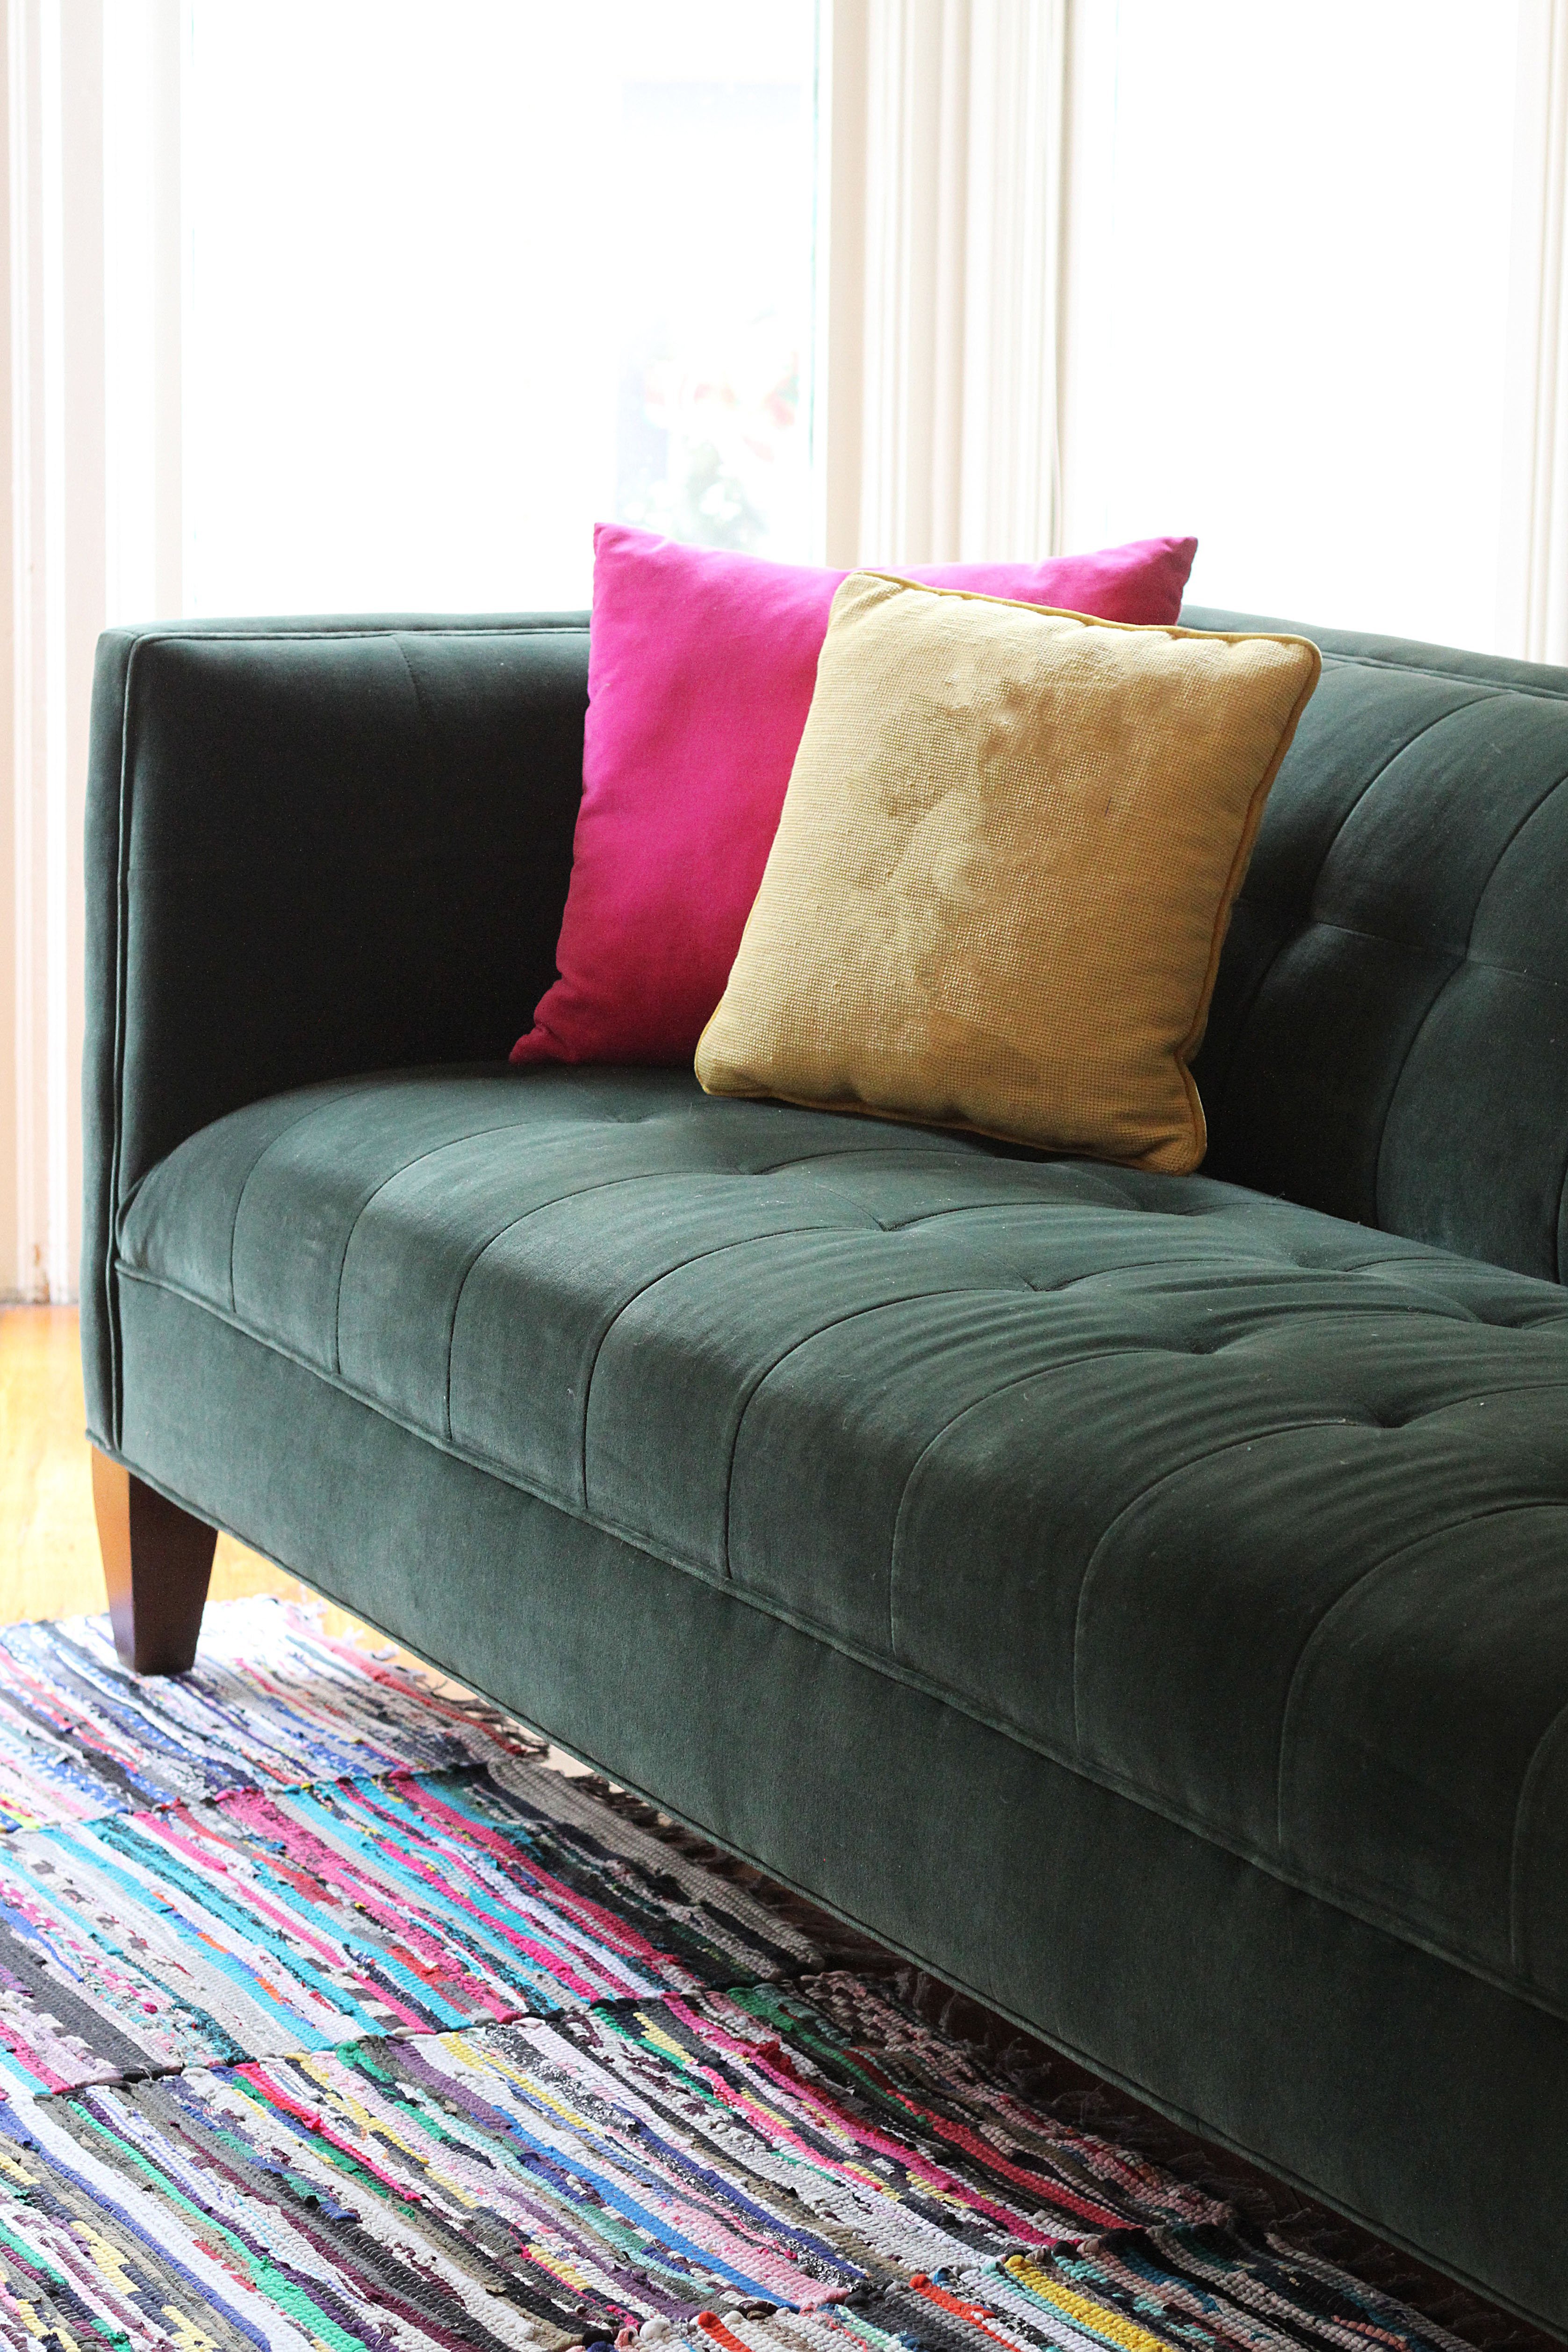 How To Clean Velvet Upholstery | Apartment Therapy